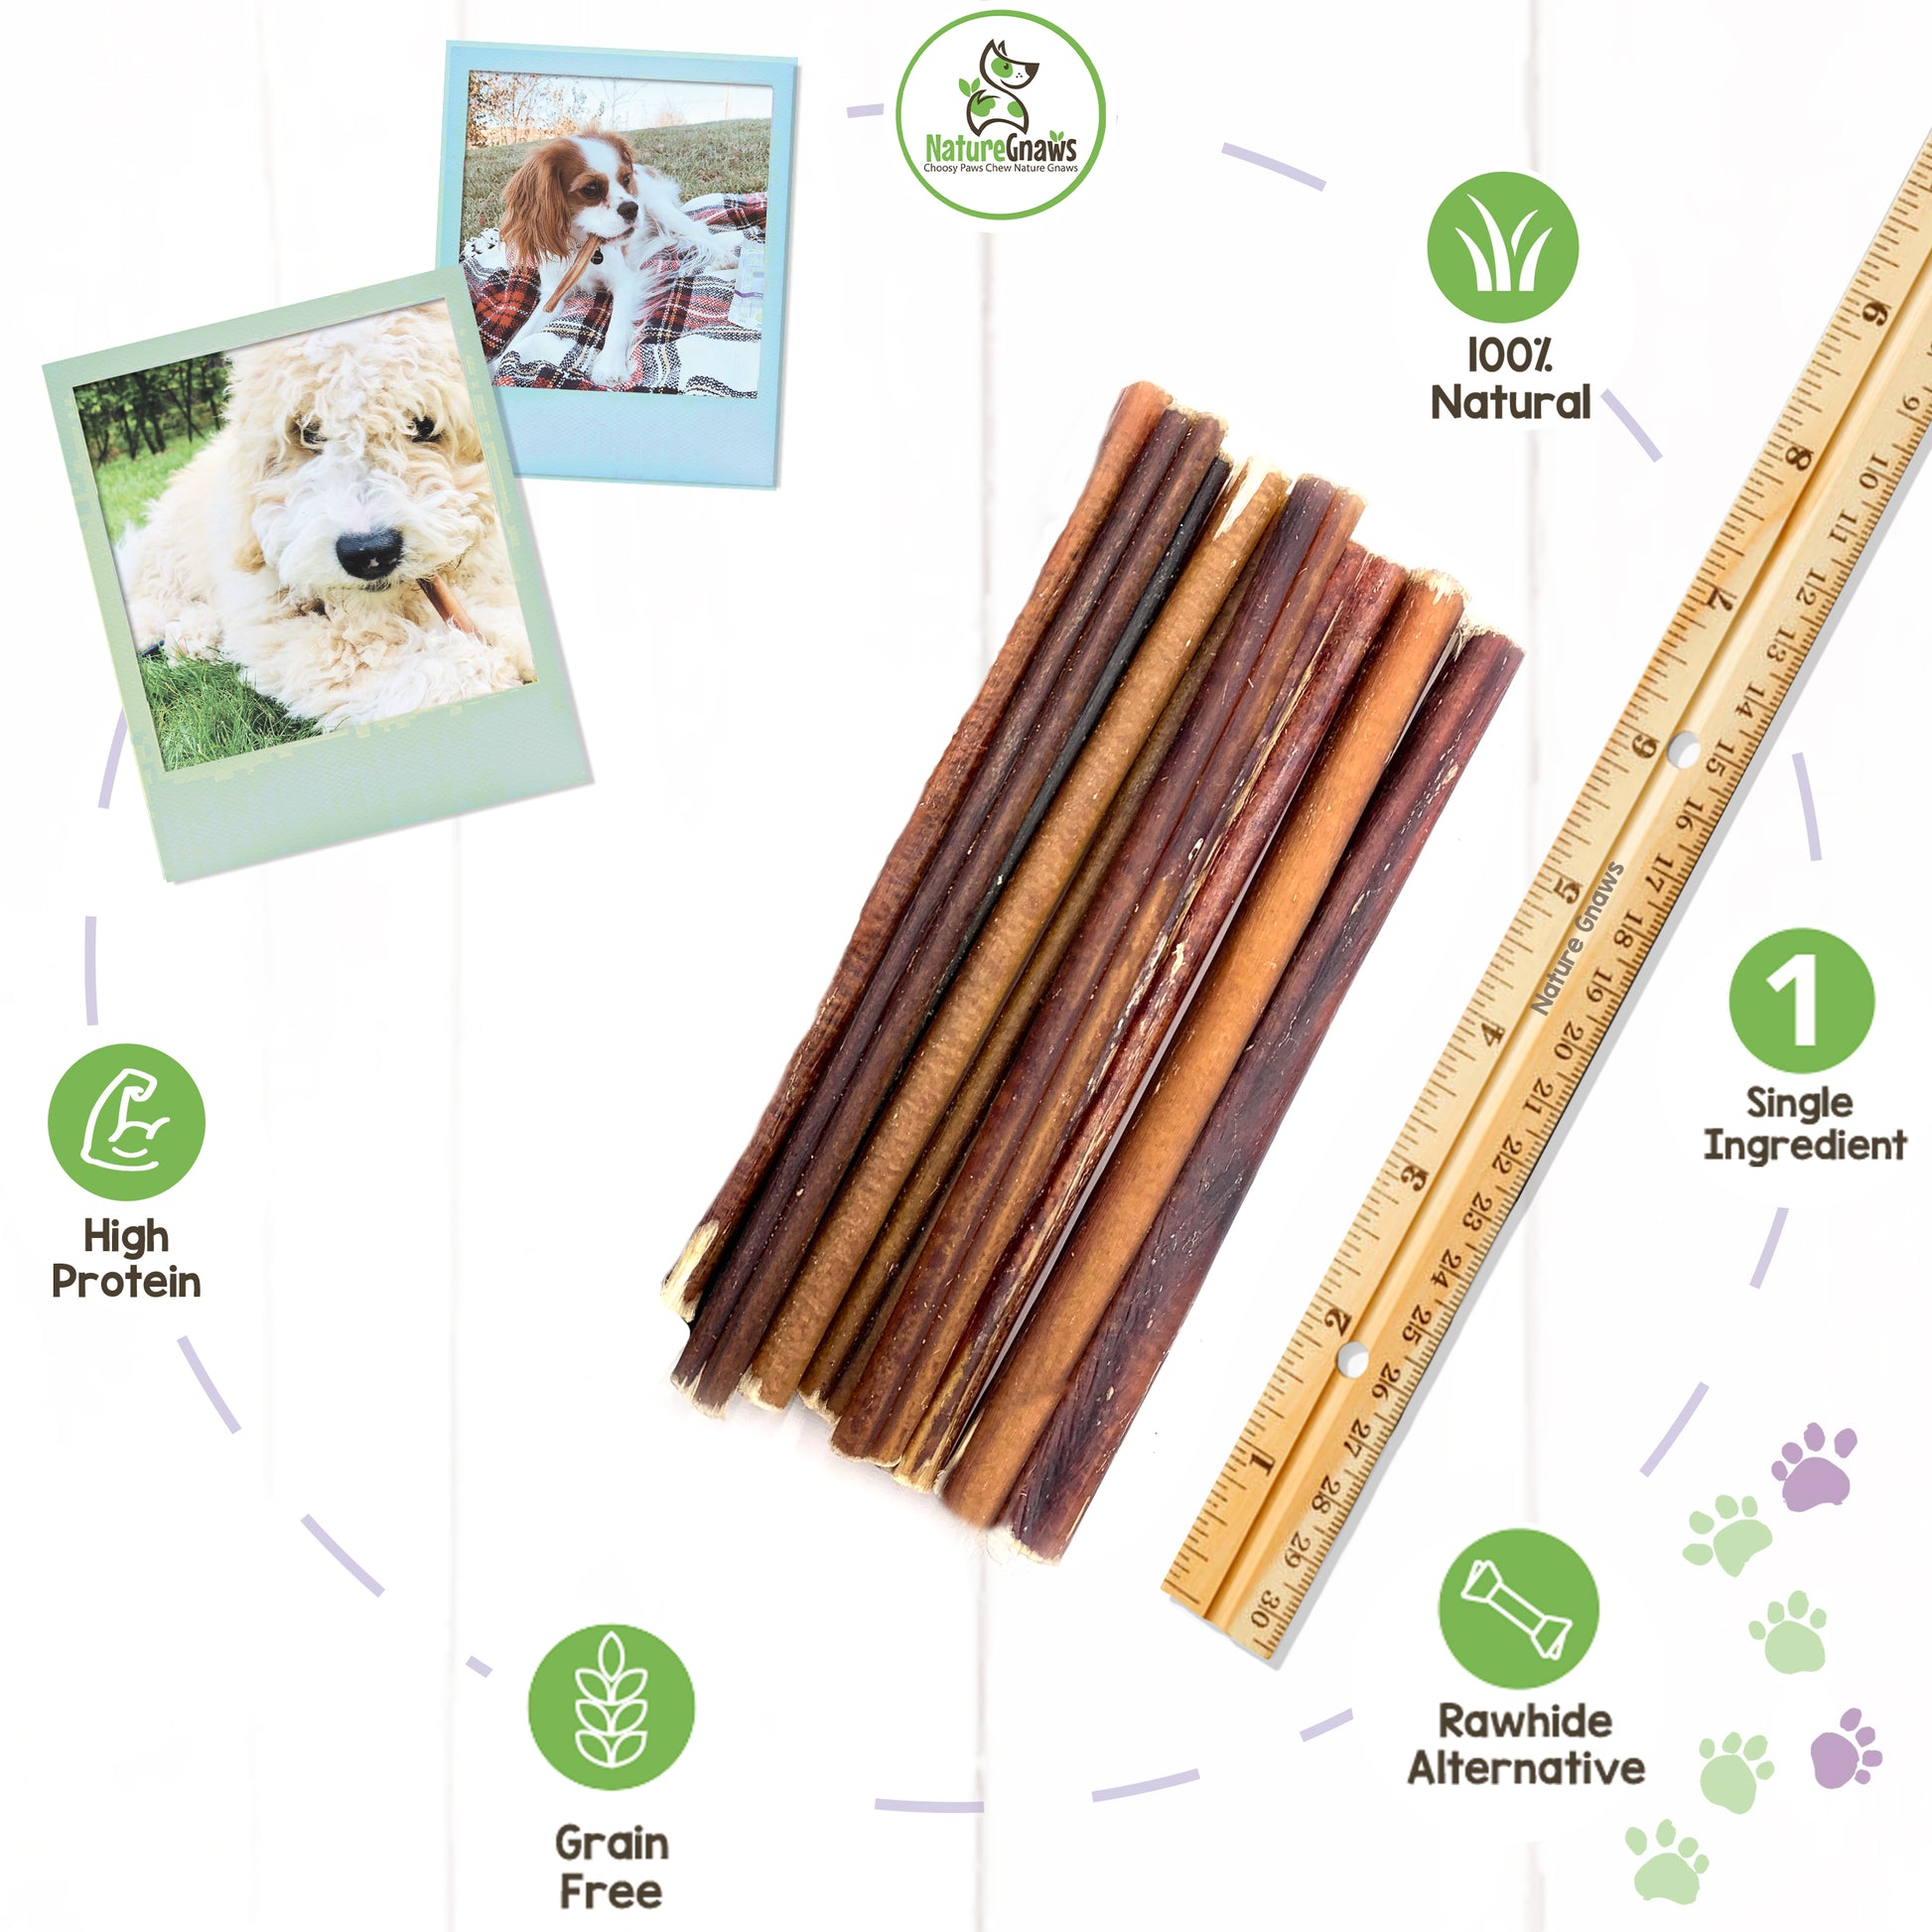 pile of 6" extra thin bully sticks next to ruler with green benefits icons and 2 polaroid images of small dogs with extra thin bully sticks in their mouths